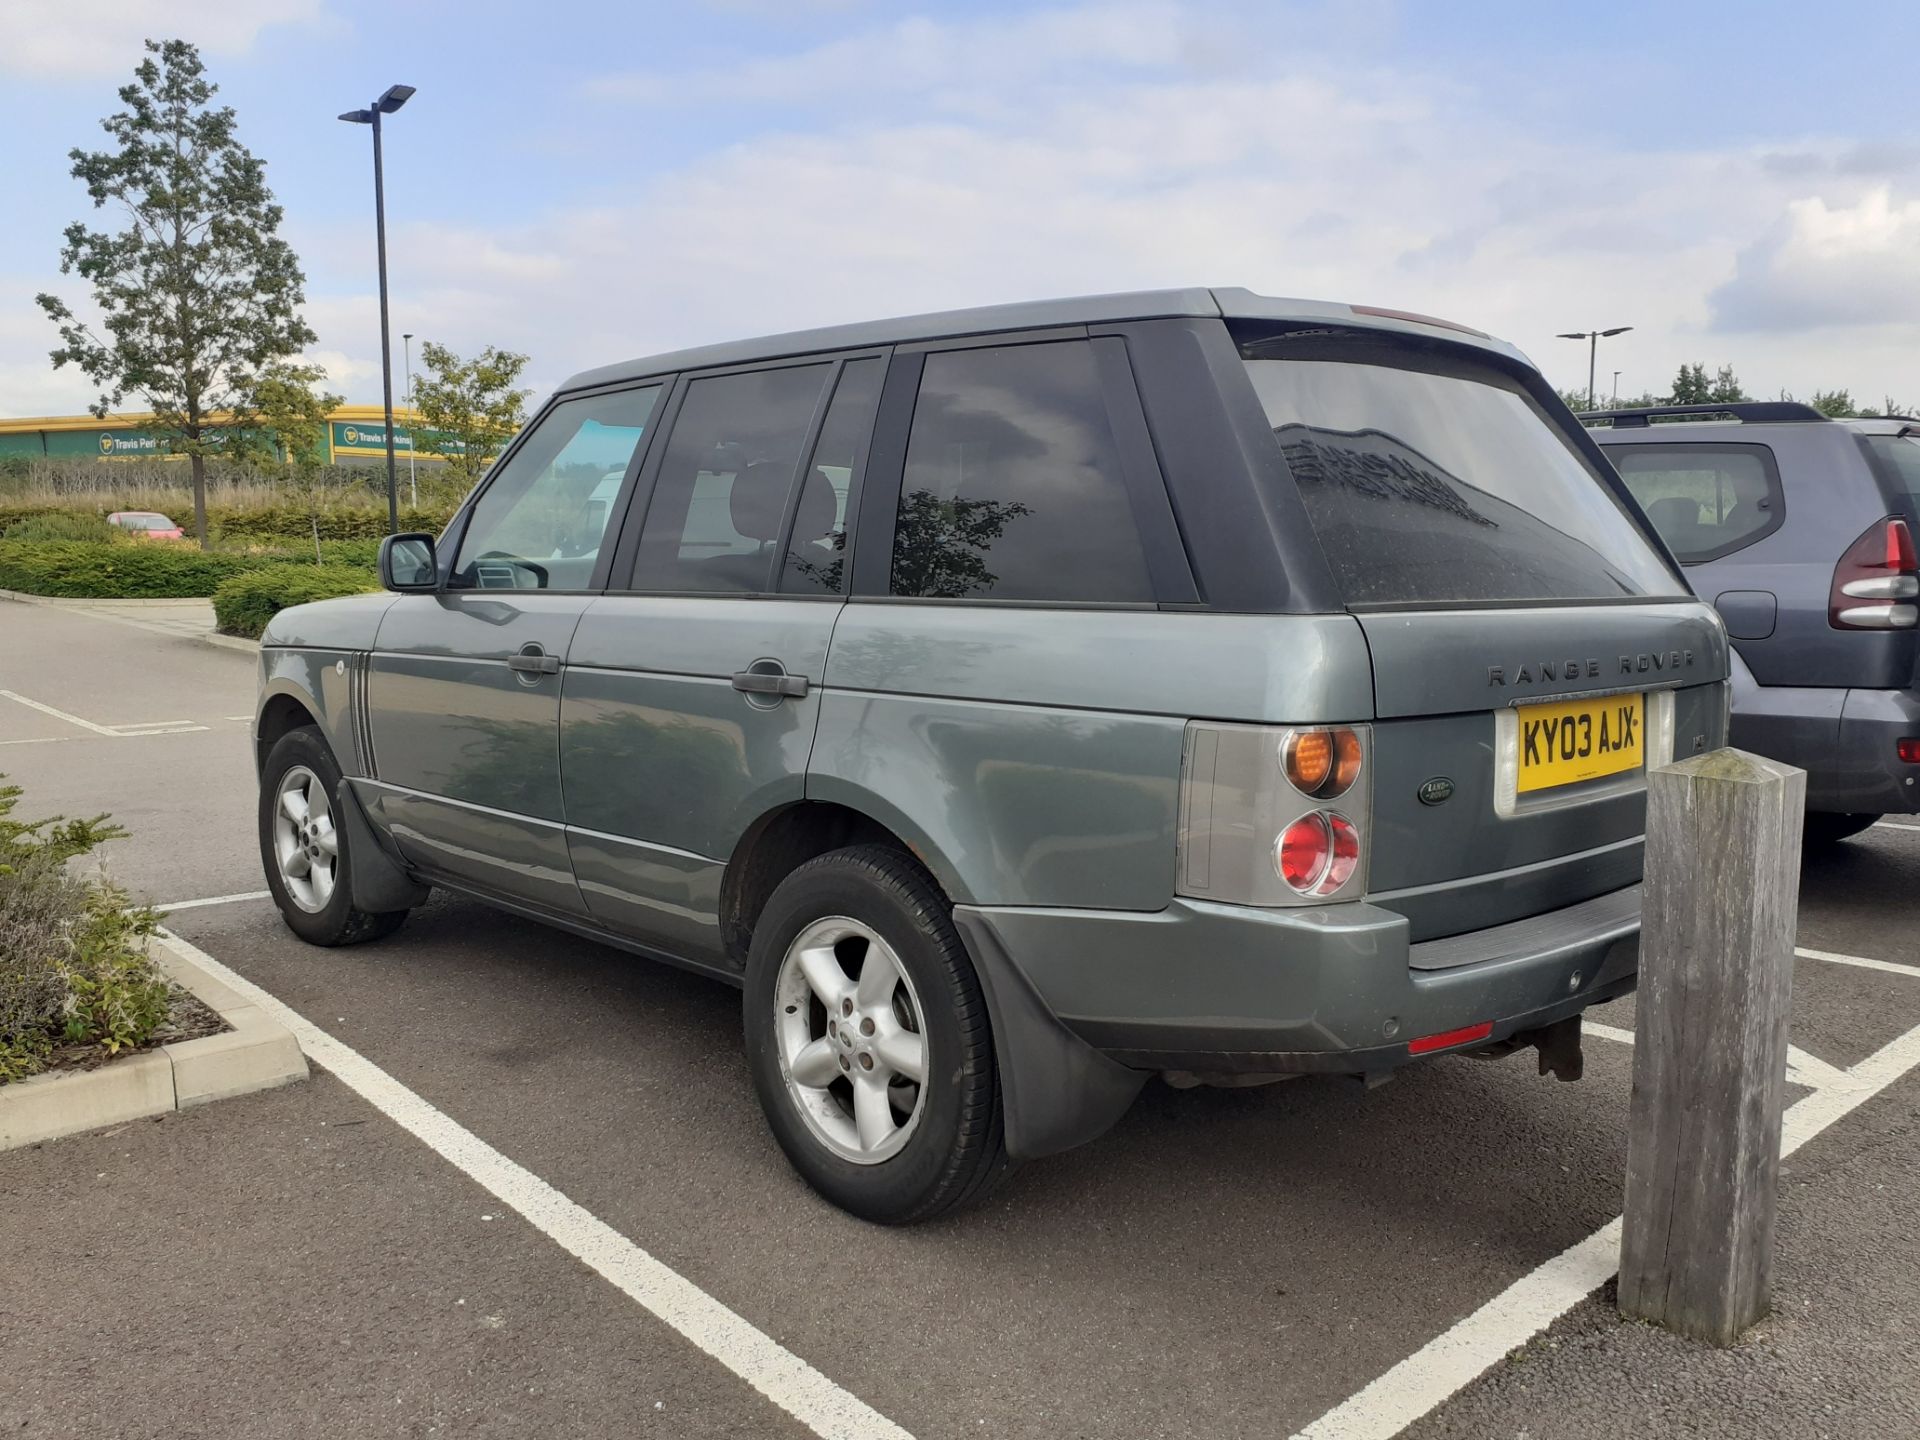 KY03 AJX, Land Rover, Range Rover HSE TD6 Auto, 2926cc in green, first registered 01/03/2003, MOT - Image 3 of 12